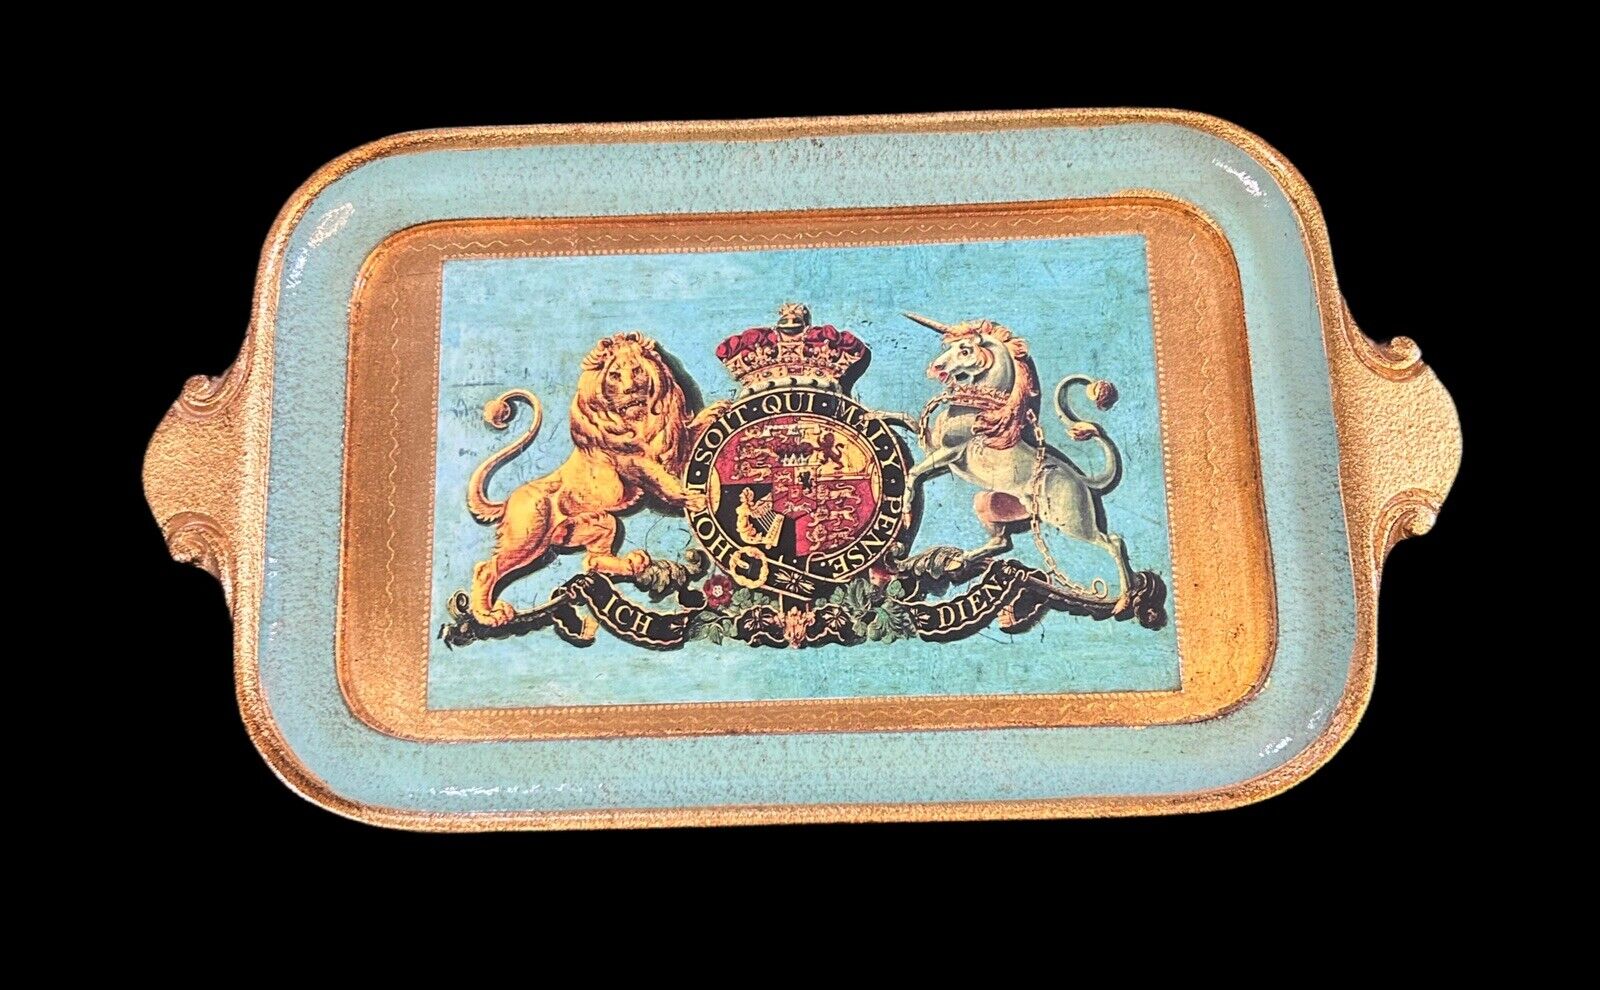 ROYAL COLLECTION BUCKINGHAM PALACE TRAY HOMI SOIT QUI MALY PENSE ICH DIEN